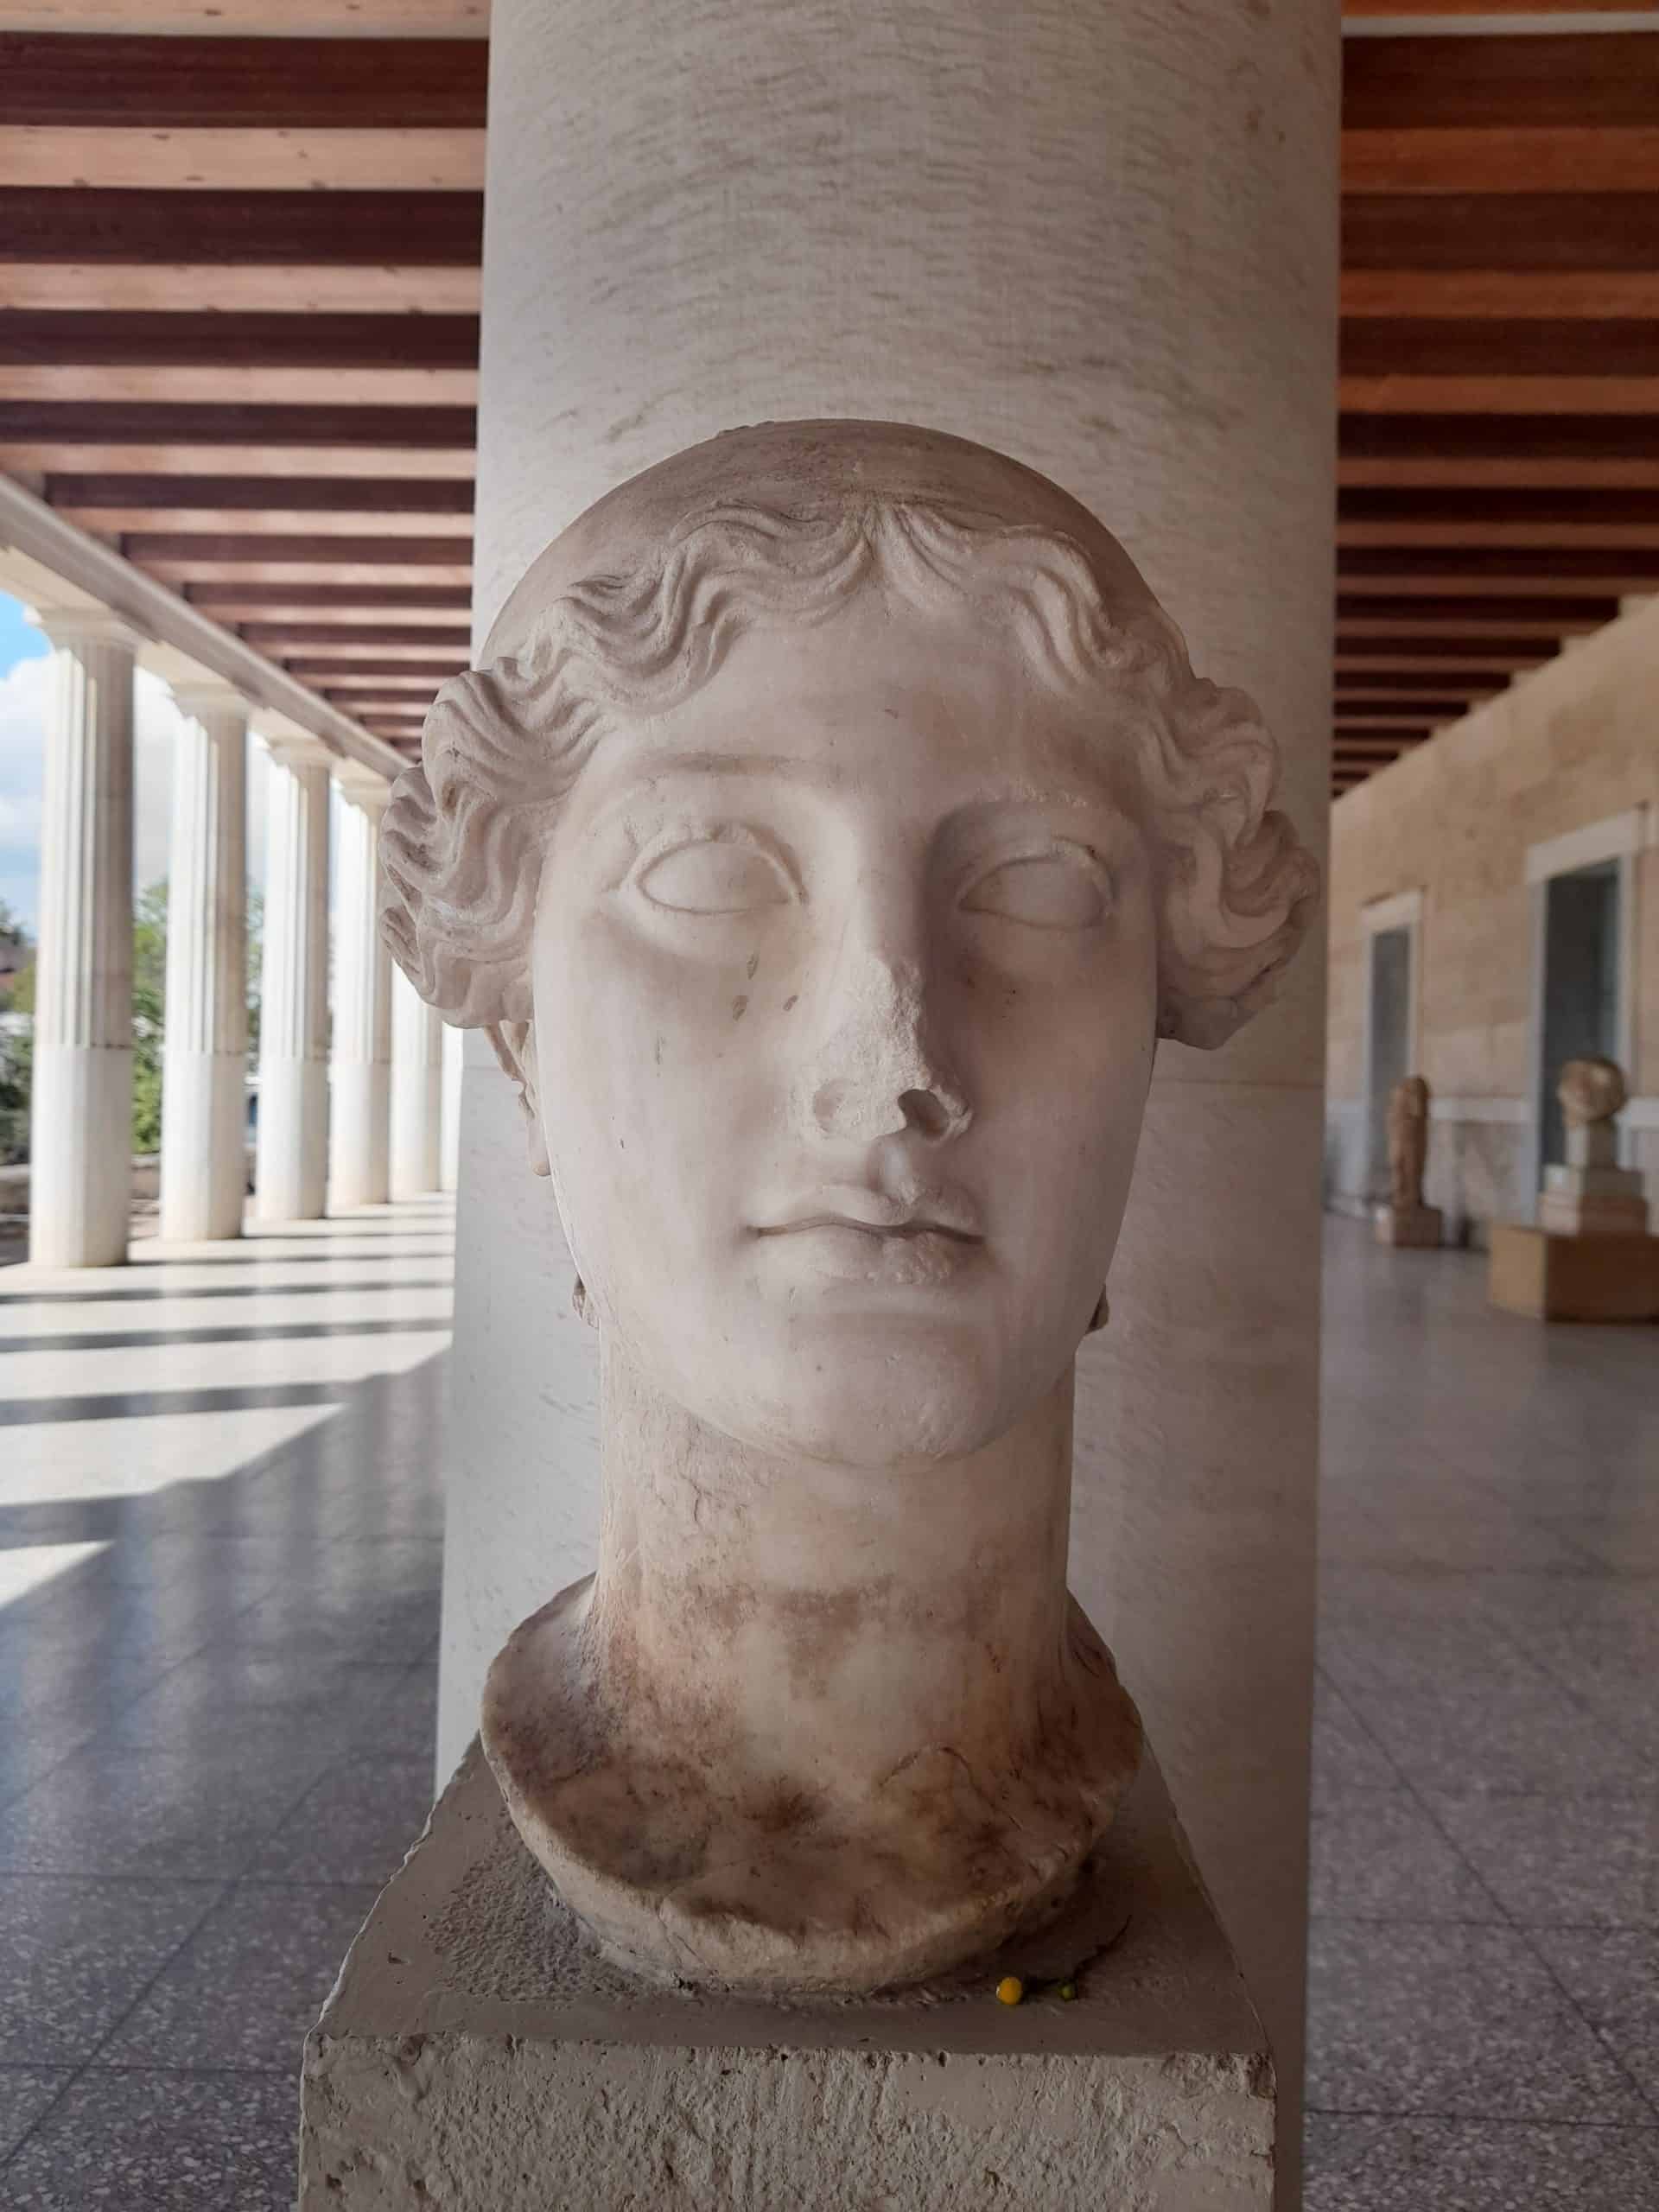 A bust inside the Stoa of Attalos at the Ancient Agora